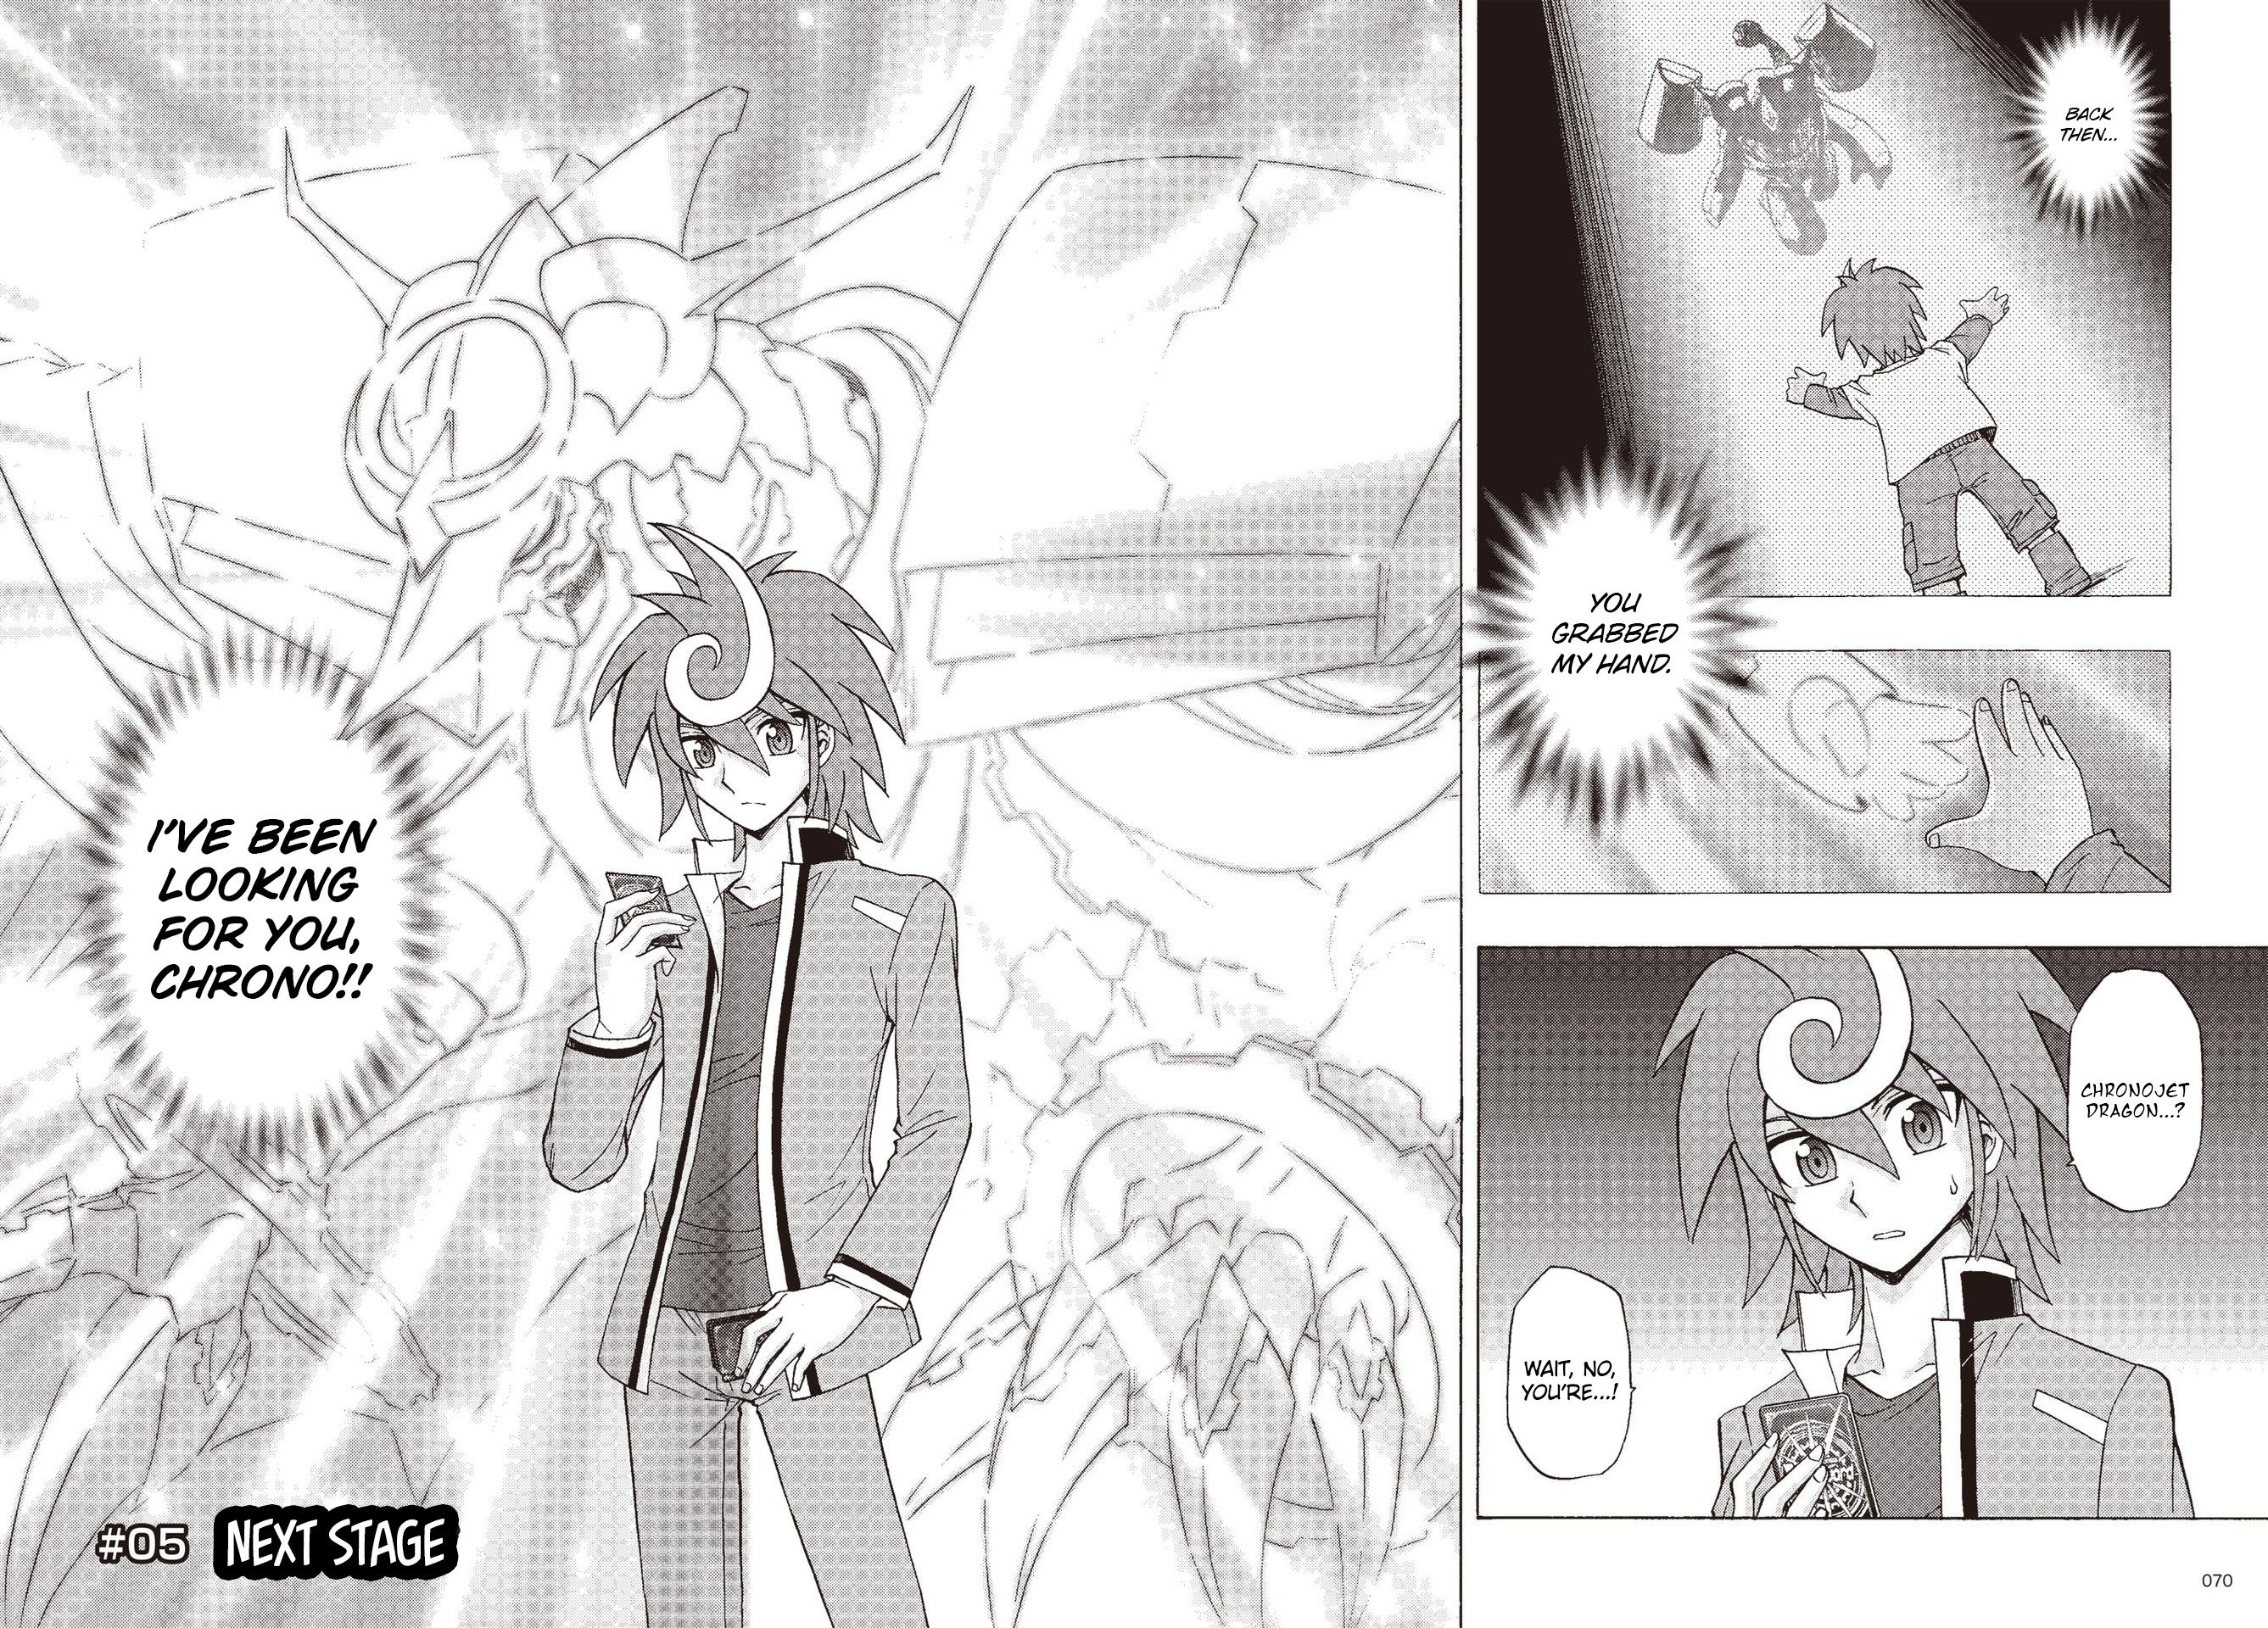 Cardfight!! Vanguard G: The Prologue Vol.1 Chapter 5: Next Stage - Picture 2